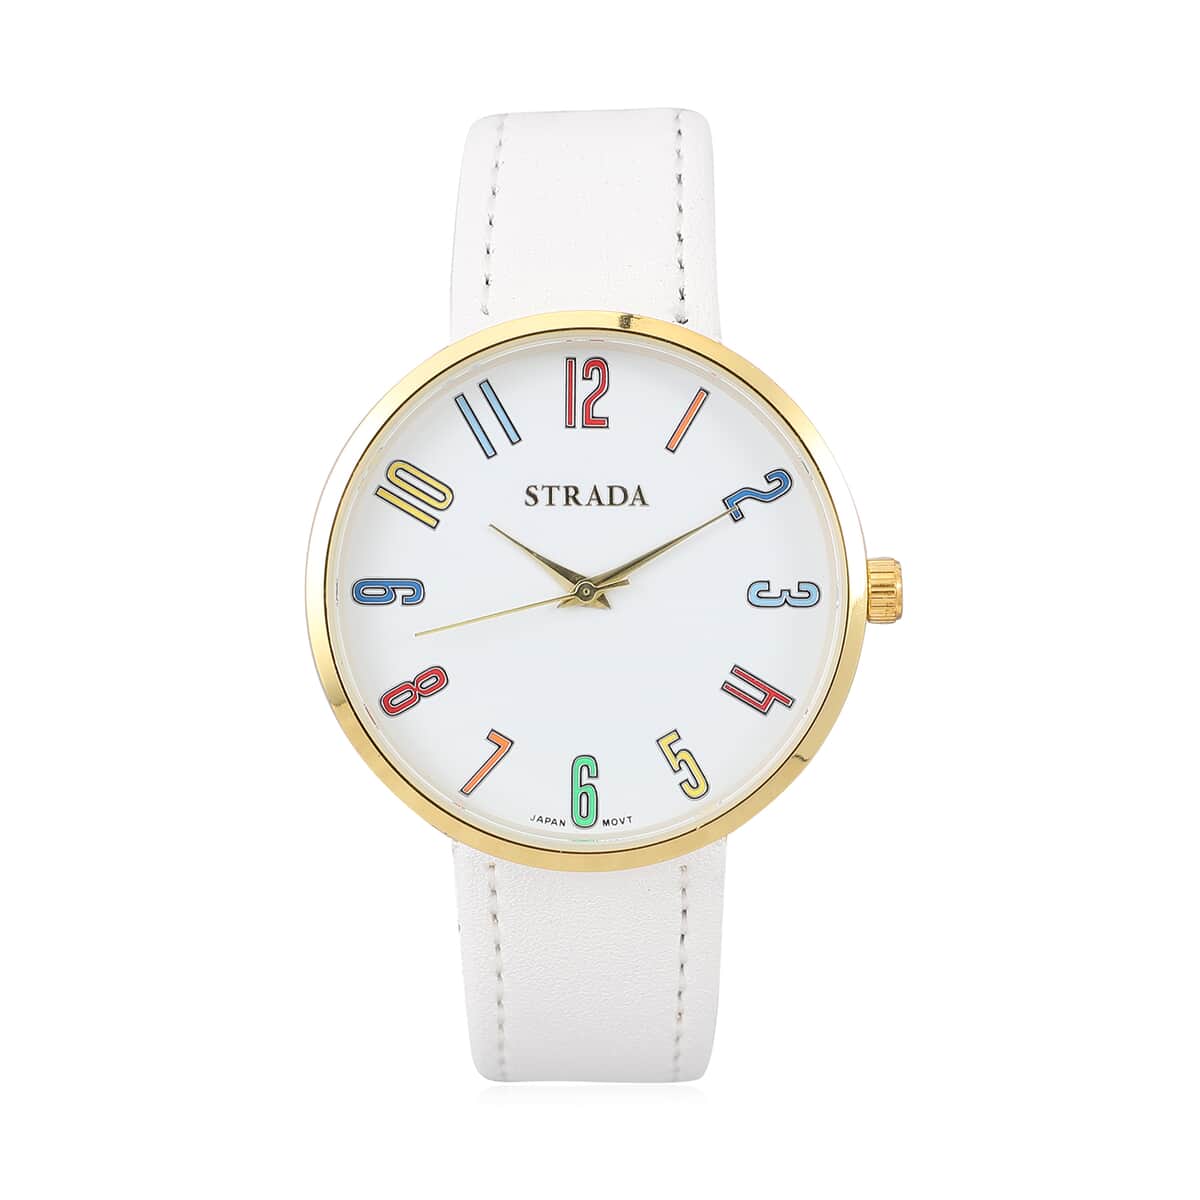 Strada Japanese Movement Water Resistant Watch with White Faux Leather Band image number 0